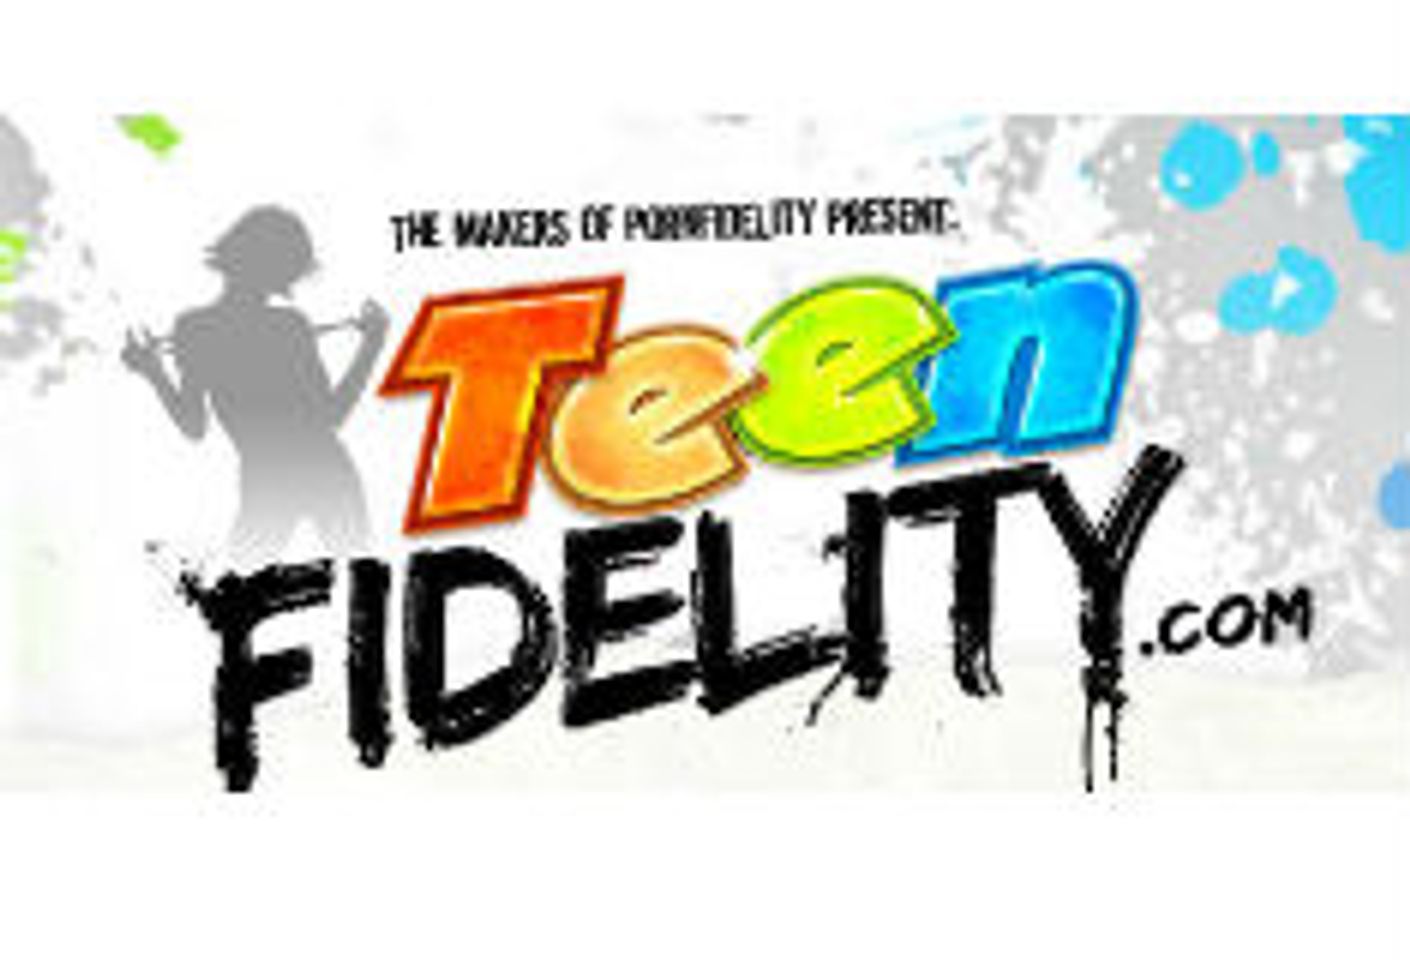 New Series From Ryan, Kelly Madison in April: Teenfidelity’s ‘Dark Side’